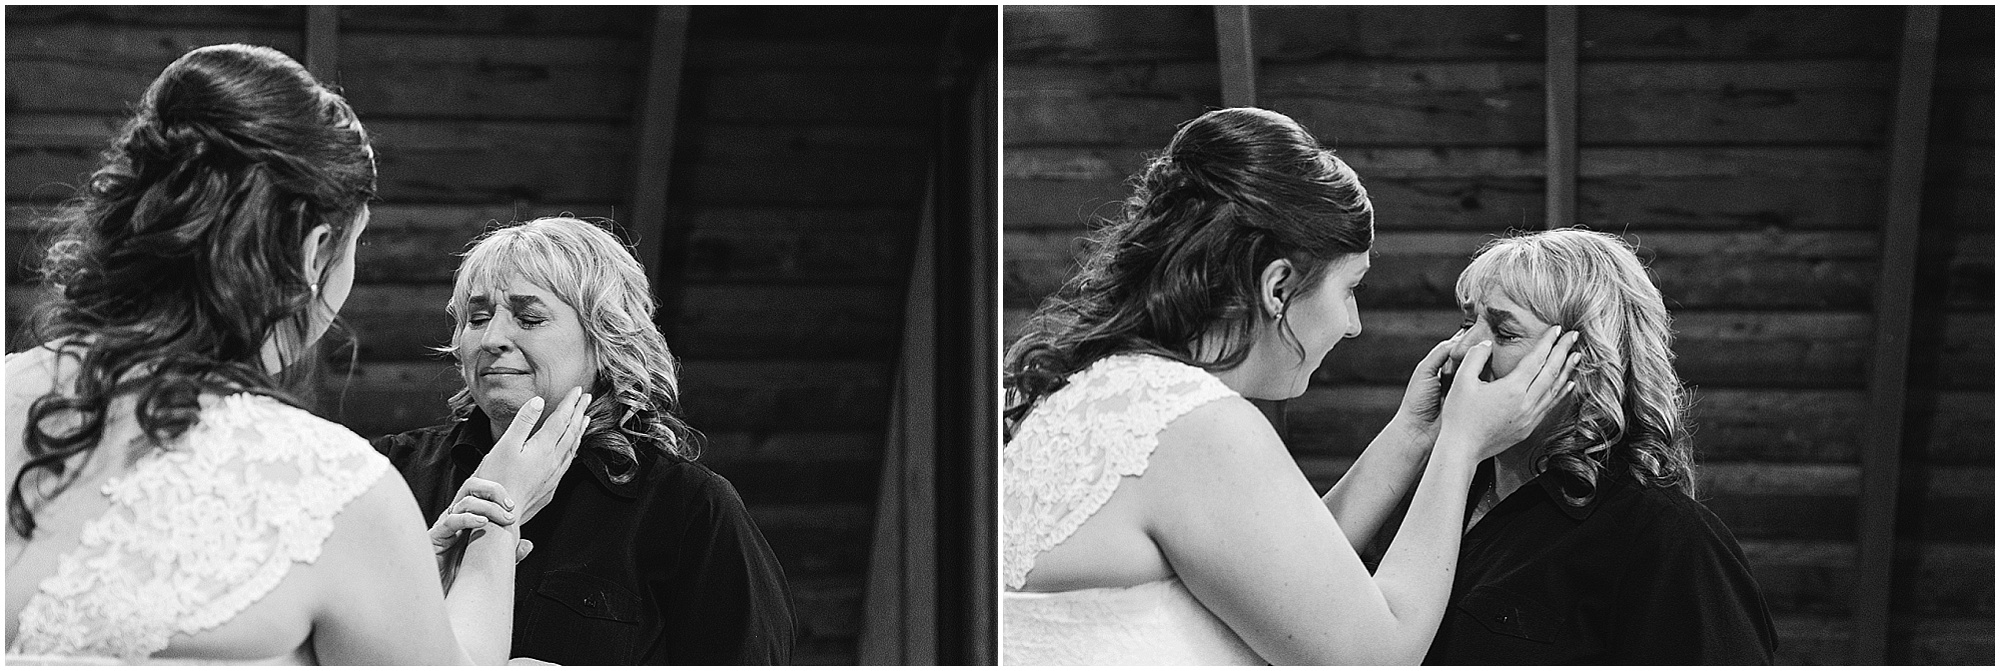 The bride wipes tears from her mother's eyes before her wedding at Hollinshead Barn in Bend, Oregon. | Erica Swantek Photography